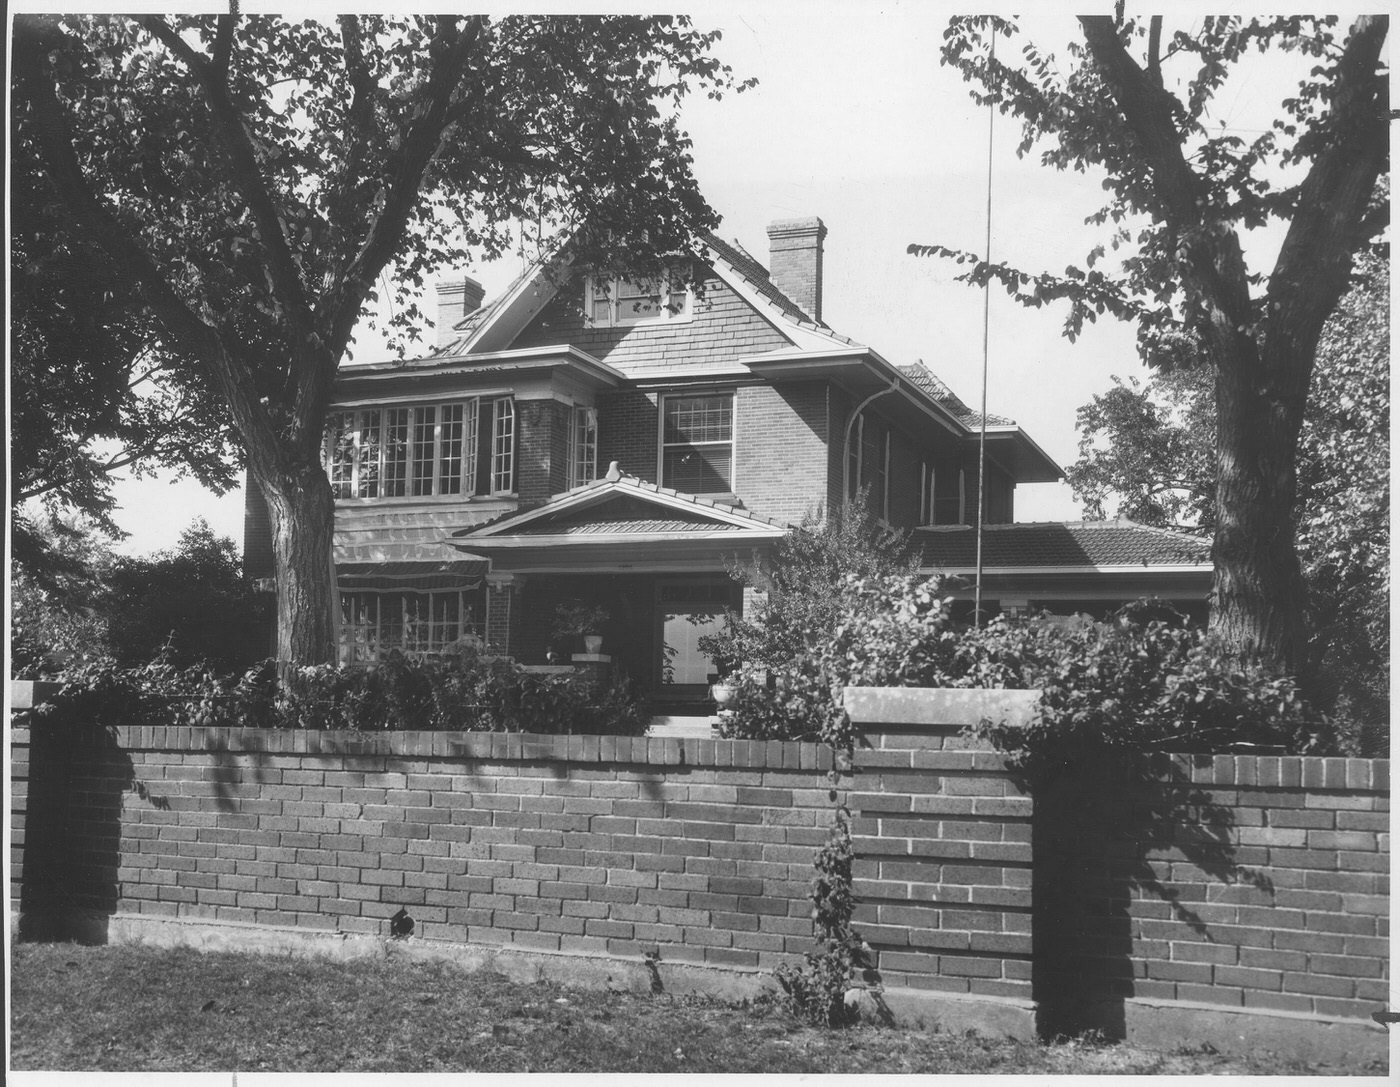 The A. T. Byers home in Arlington Heights, Fort Worth, Texas, 1947